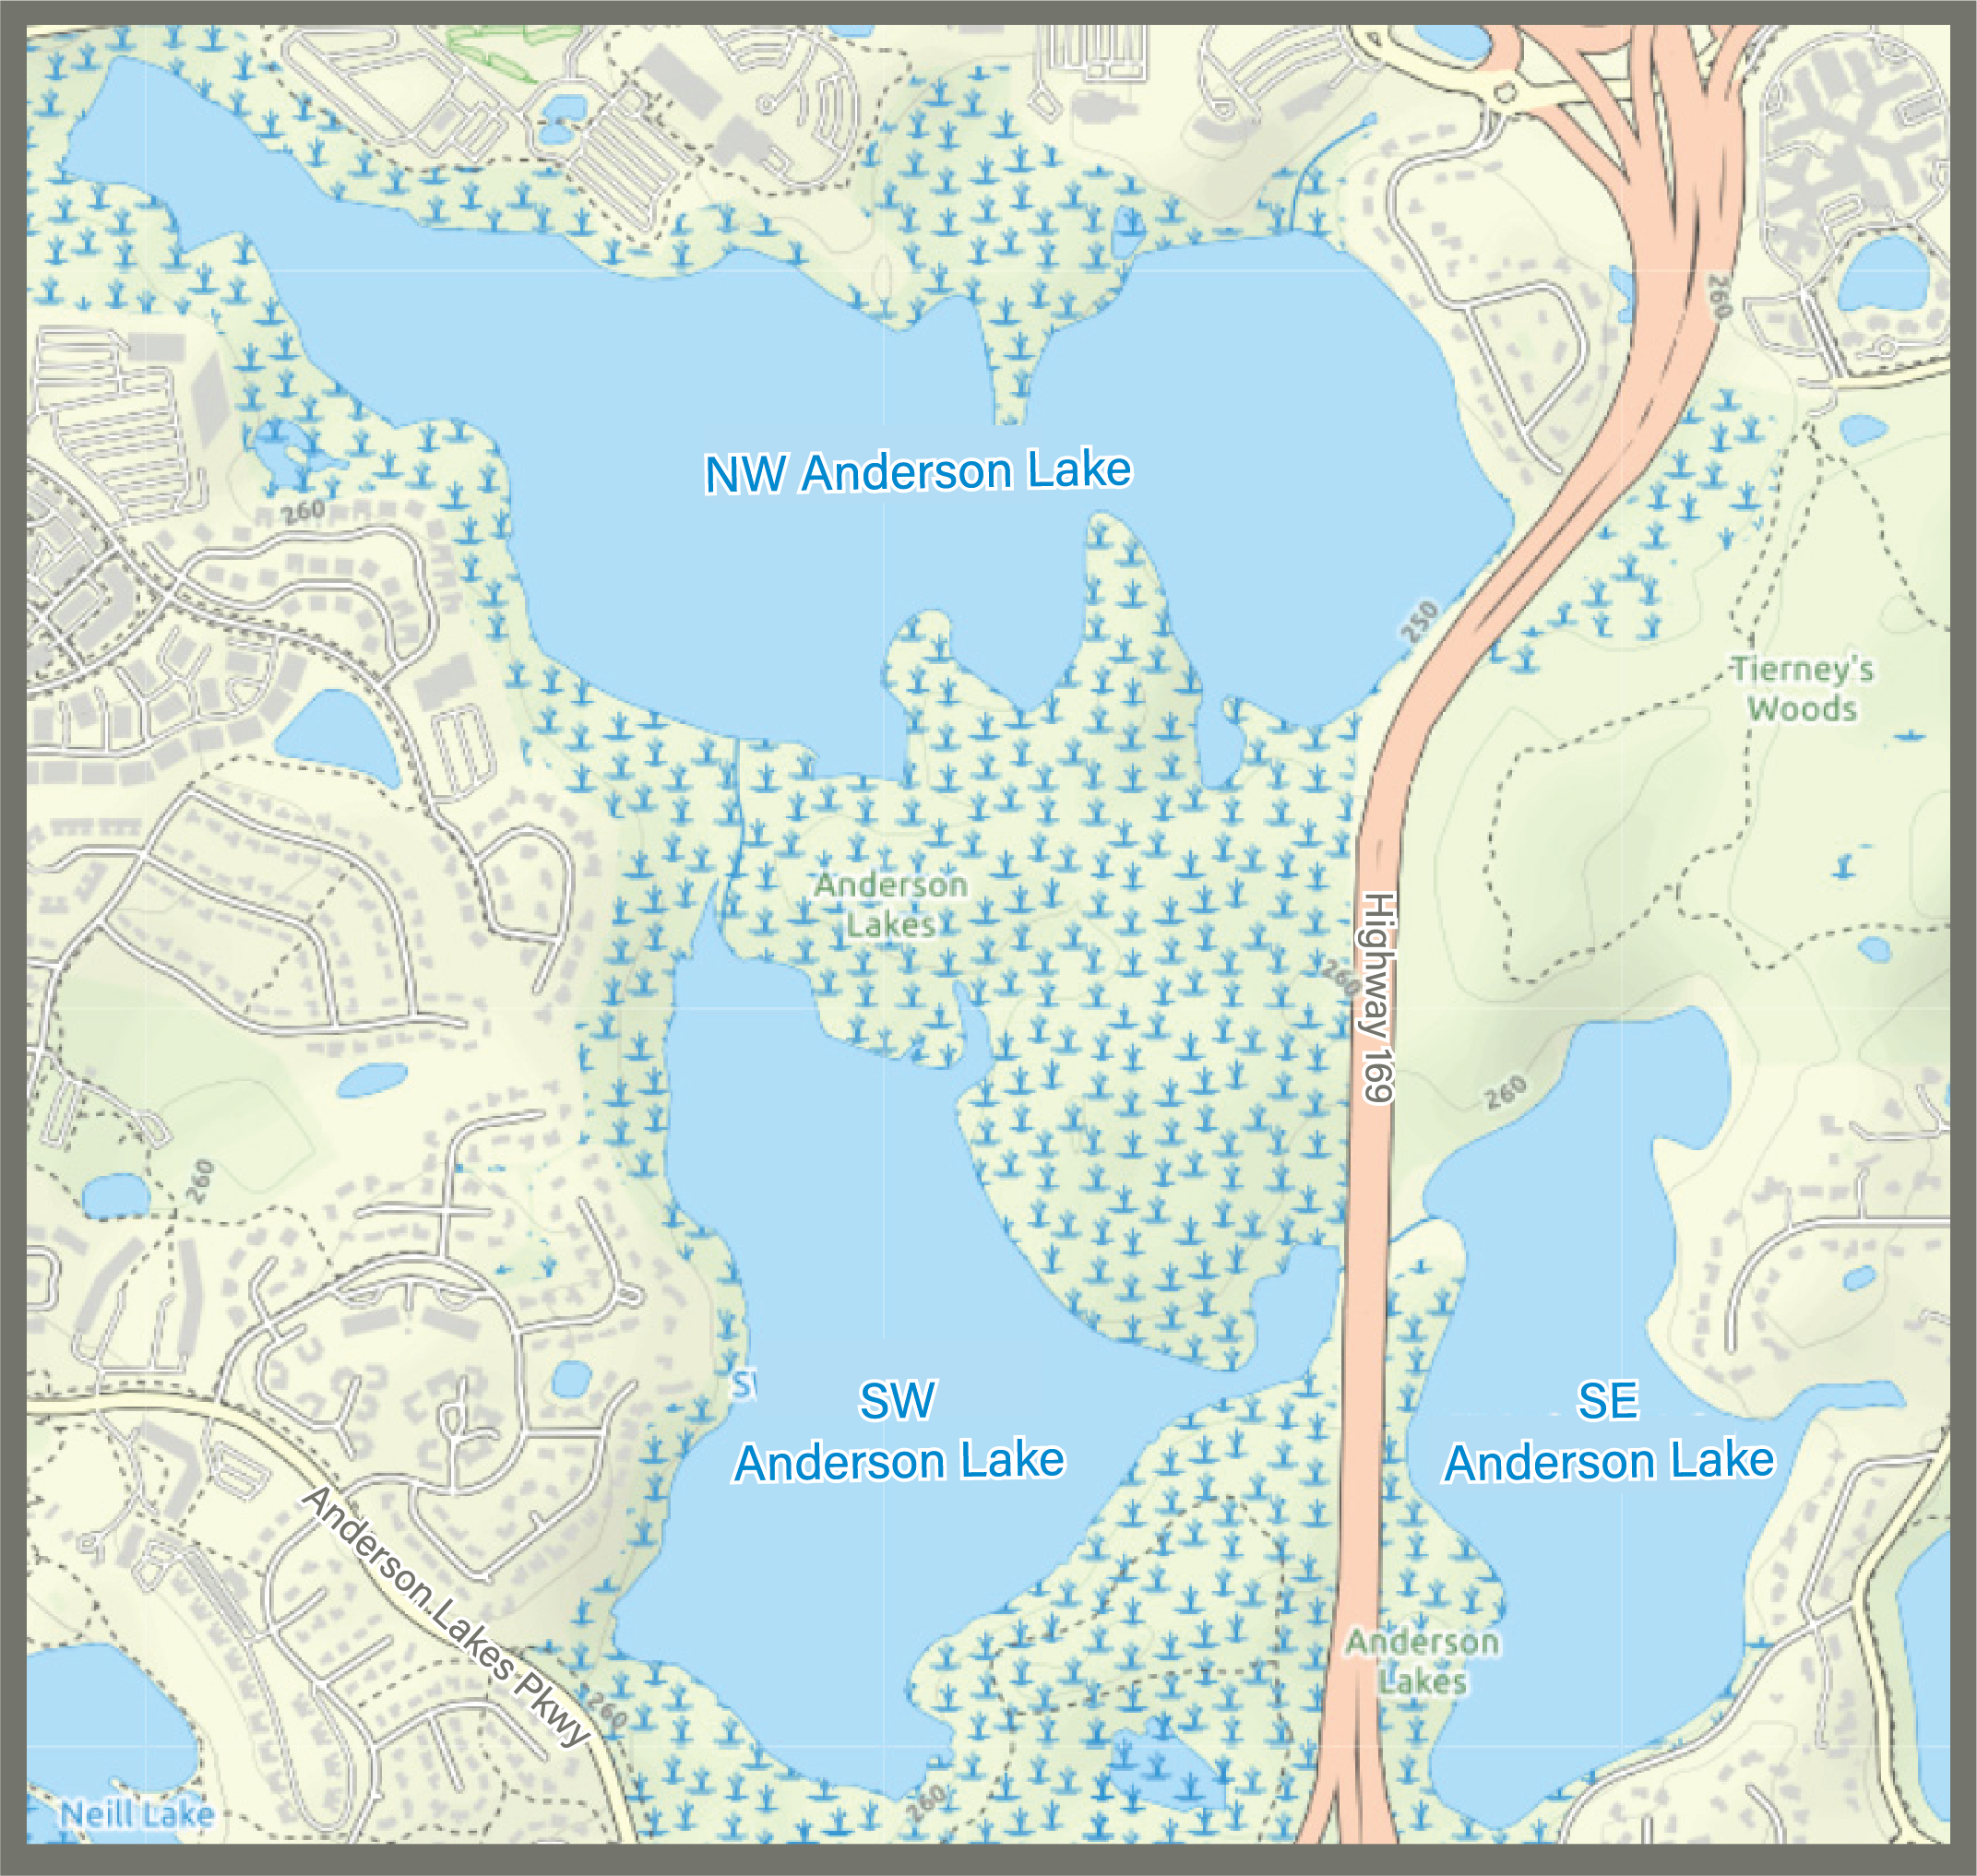 street map of NW, SW, and SE Anderson Lakes